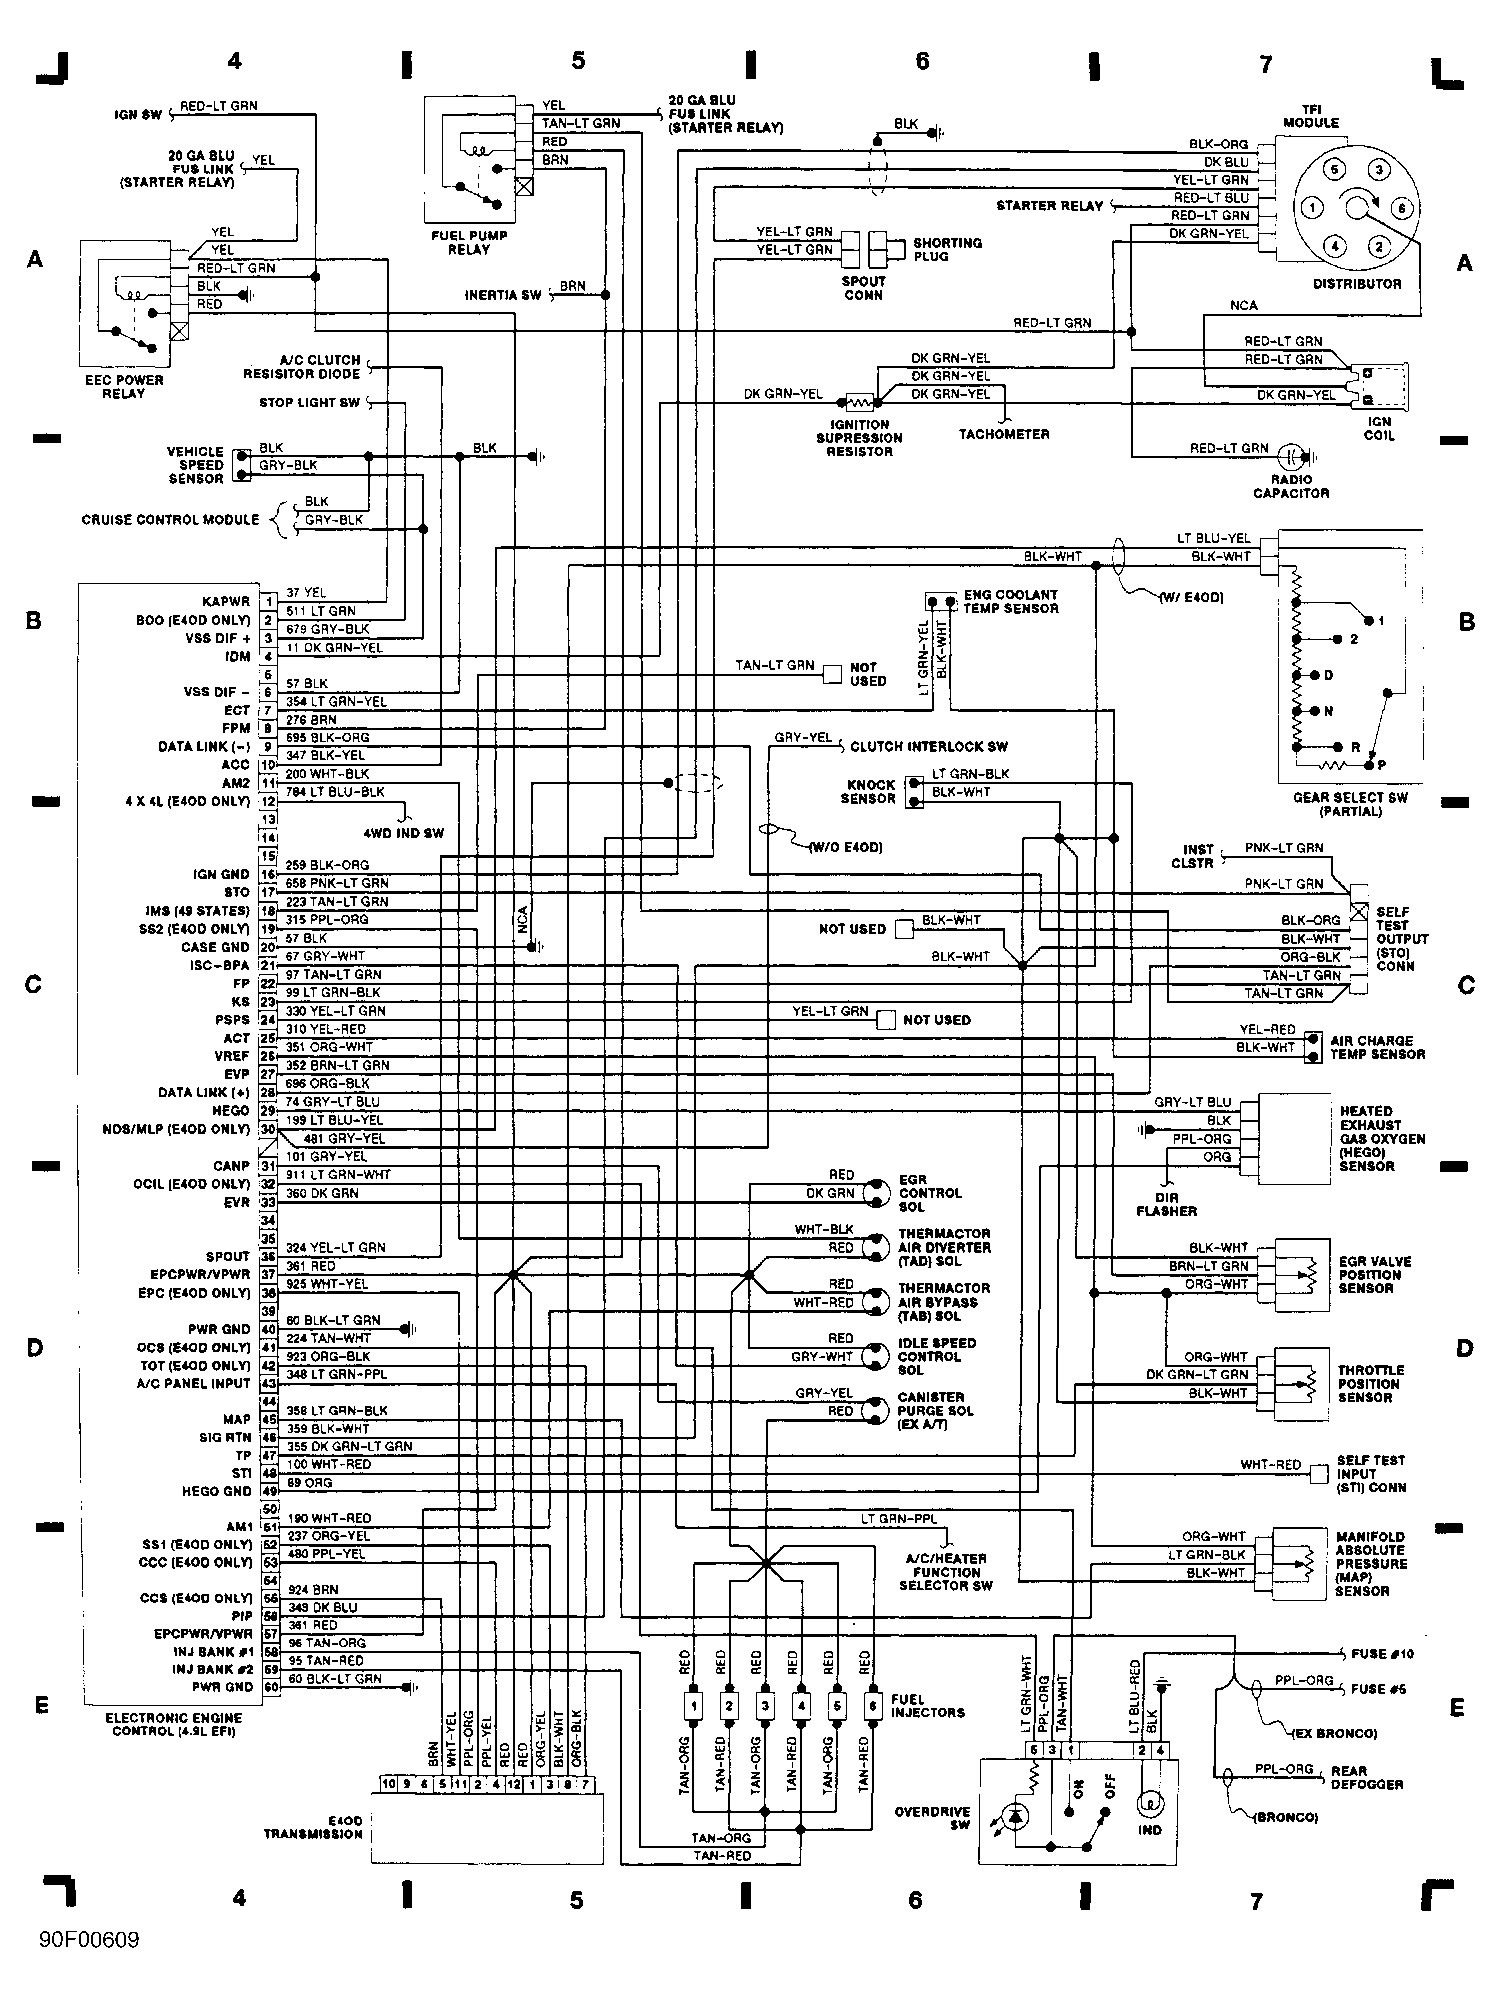 1995 ford F150 Electric Fuel Pump Wiring Schematic 1998 ford Truck Wiring Diagrams Of 1995 ford F150 Electric Fuel Pump Wiring Schematic